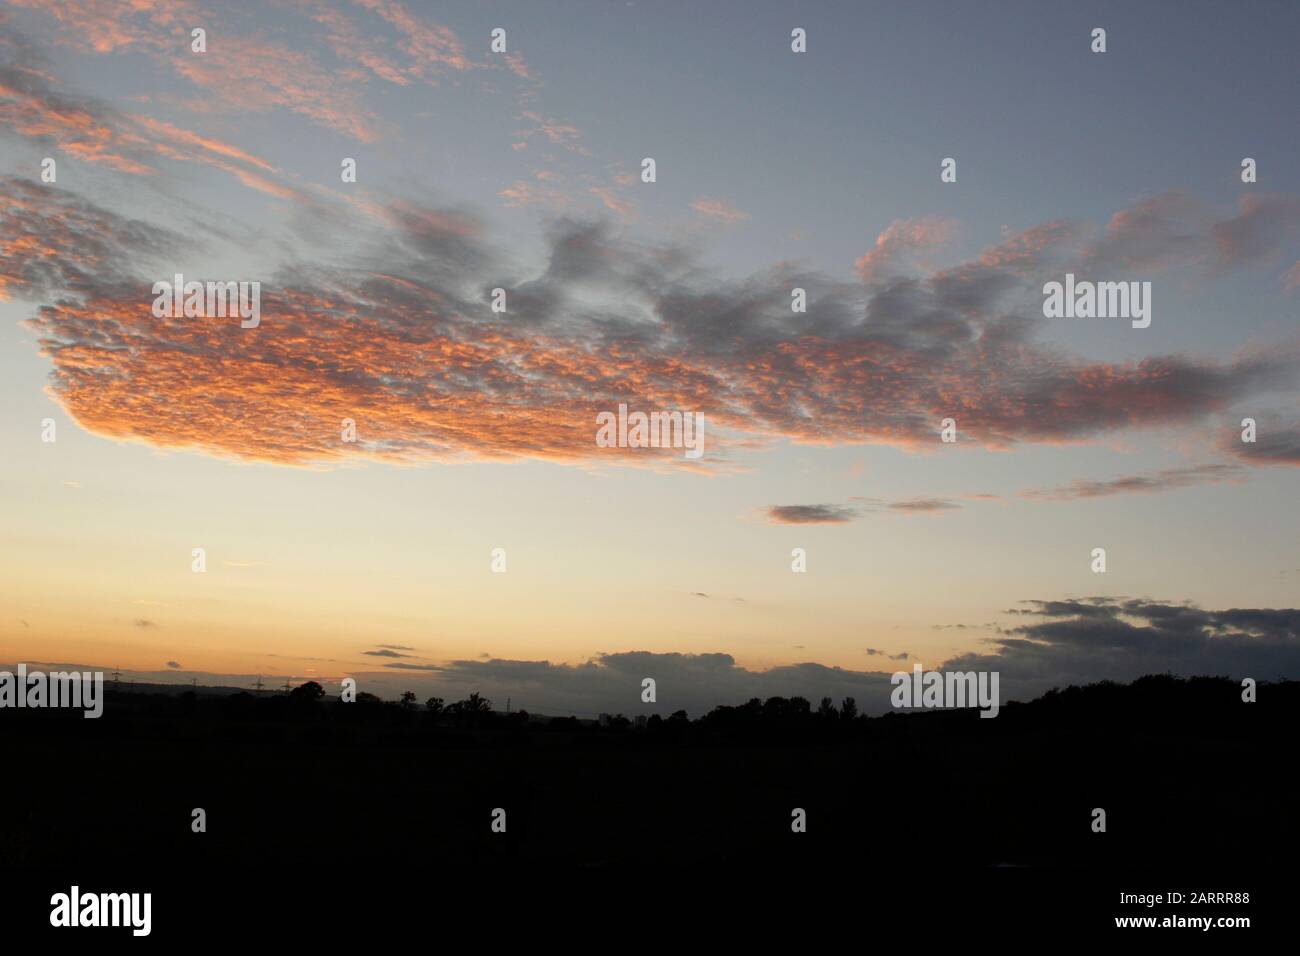 Rare and unusual cloud formation in September sky Stock Photo